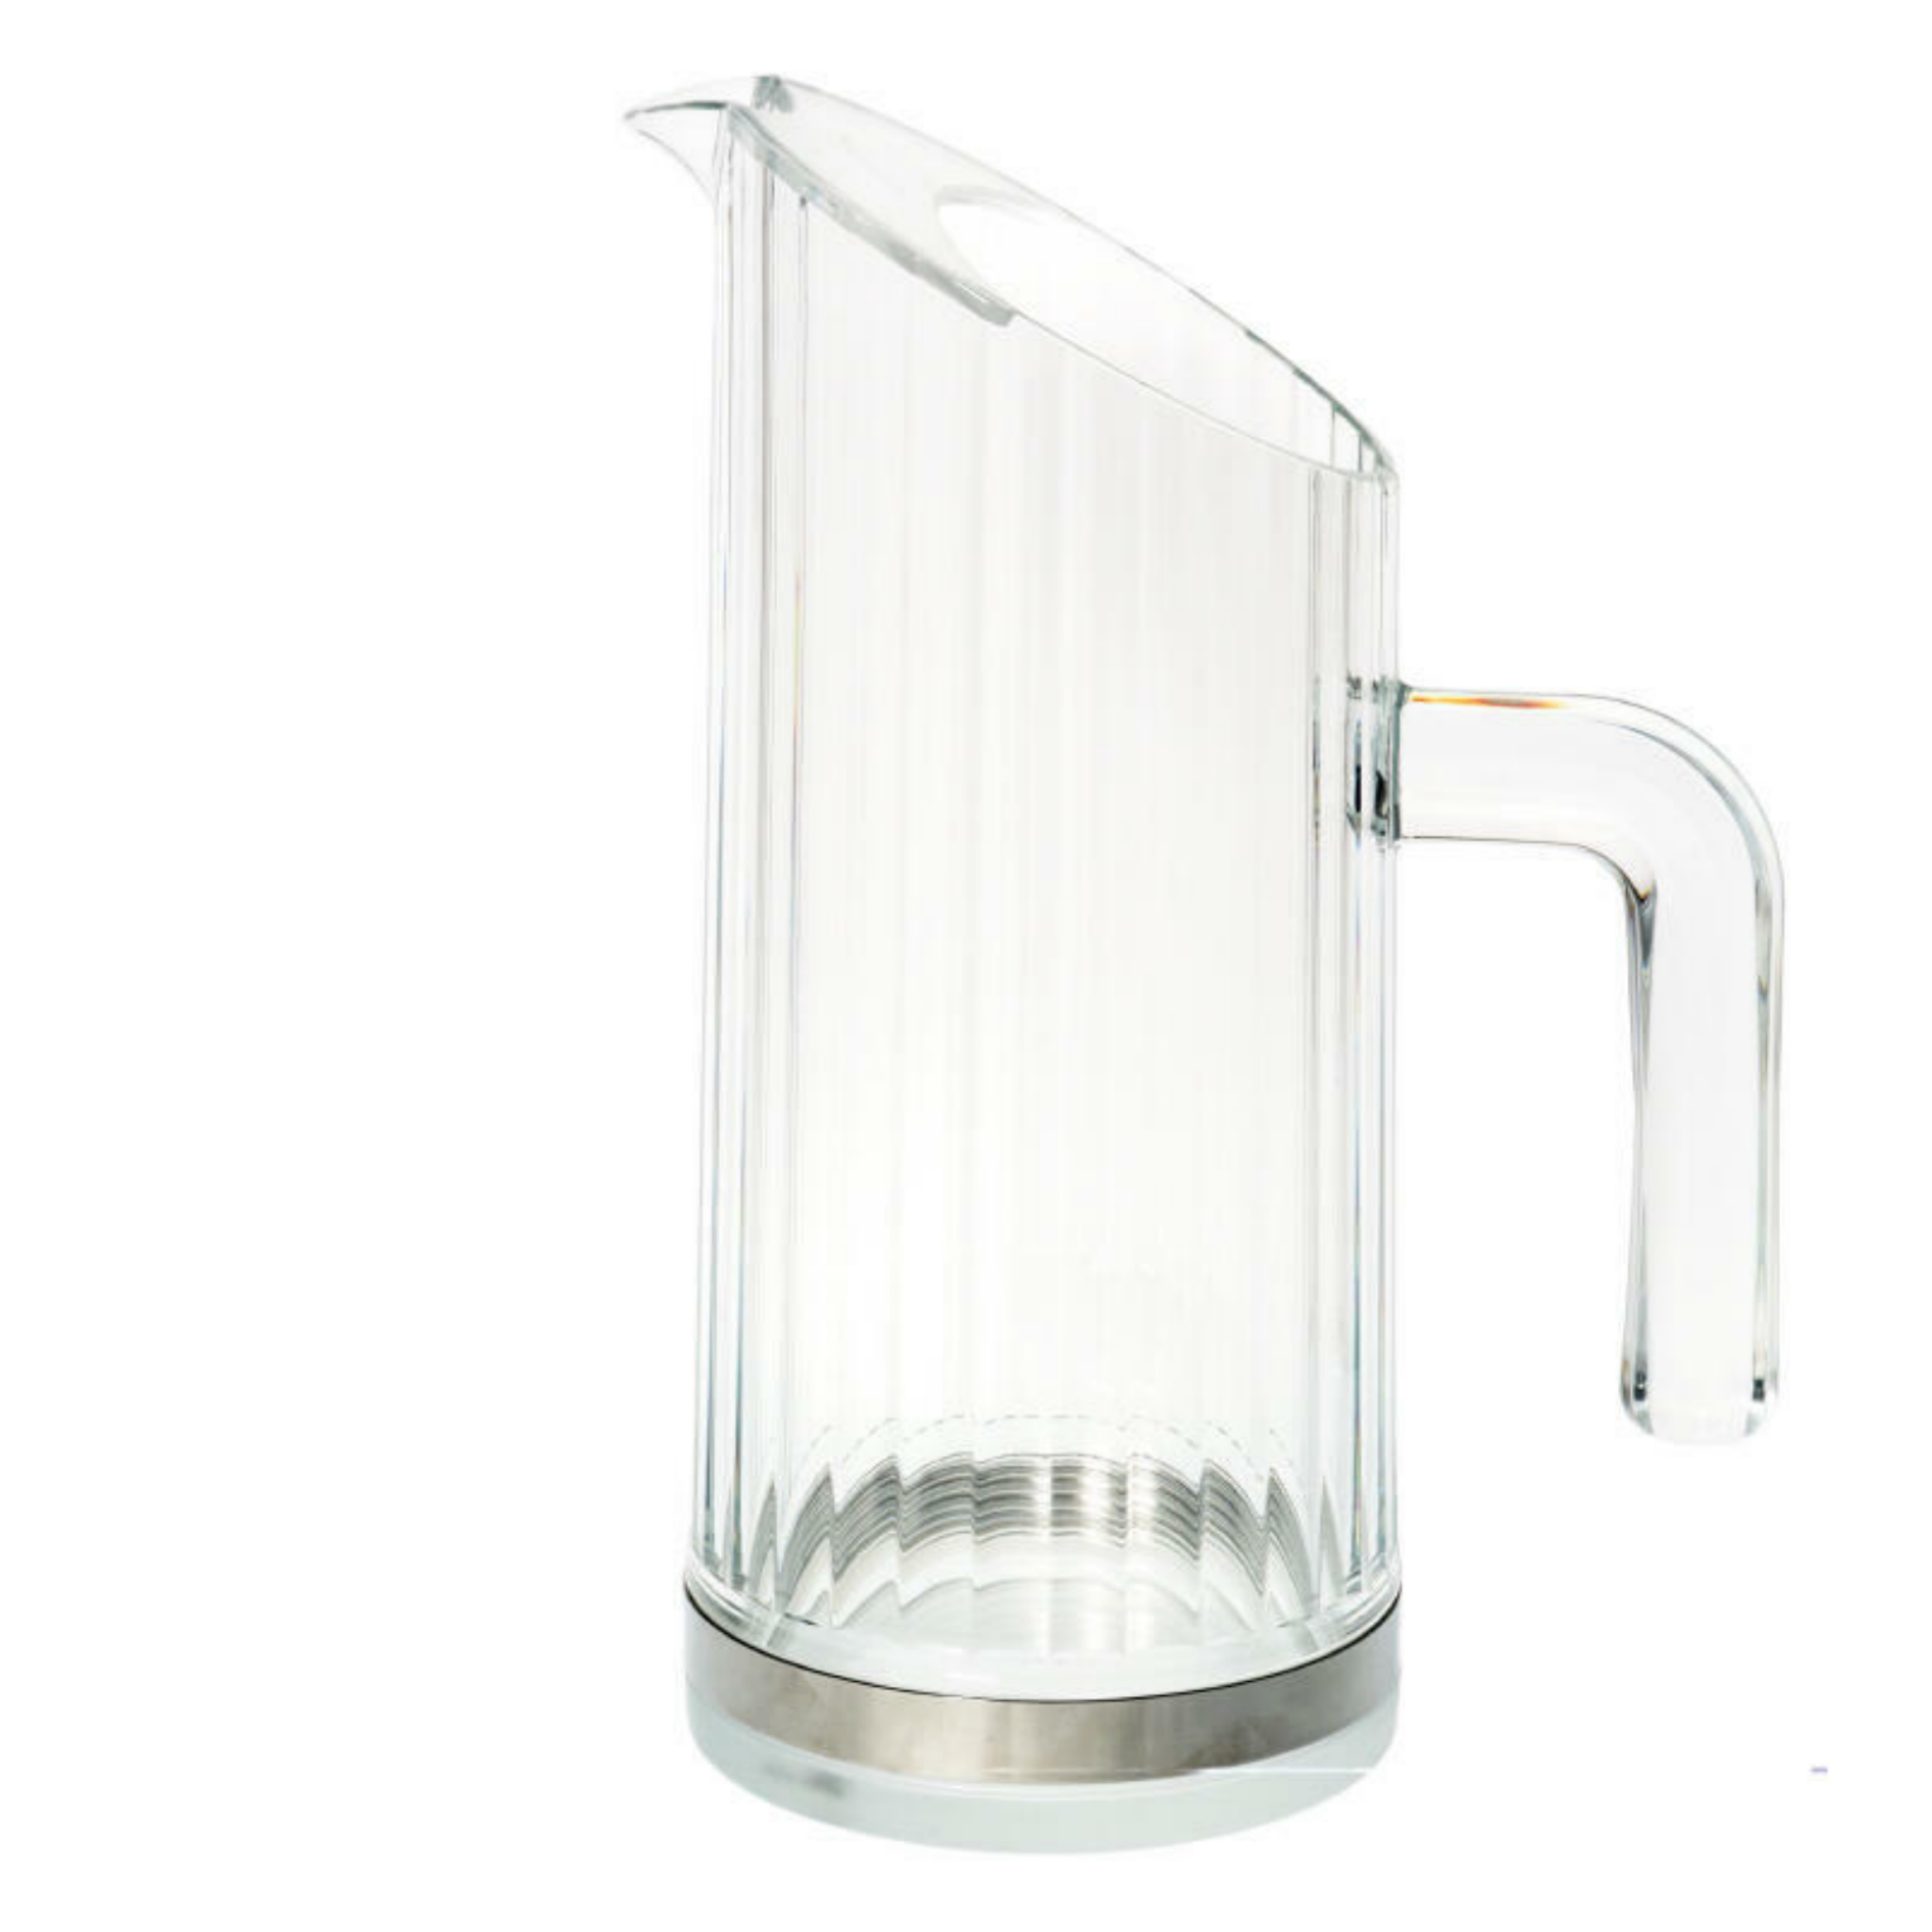 WATER PITCHER C/W REMOVABLE BASE - 1 LITRE